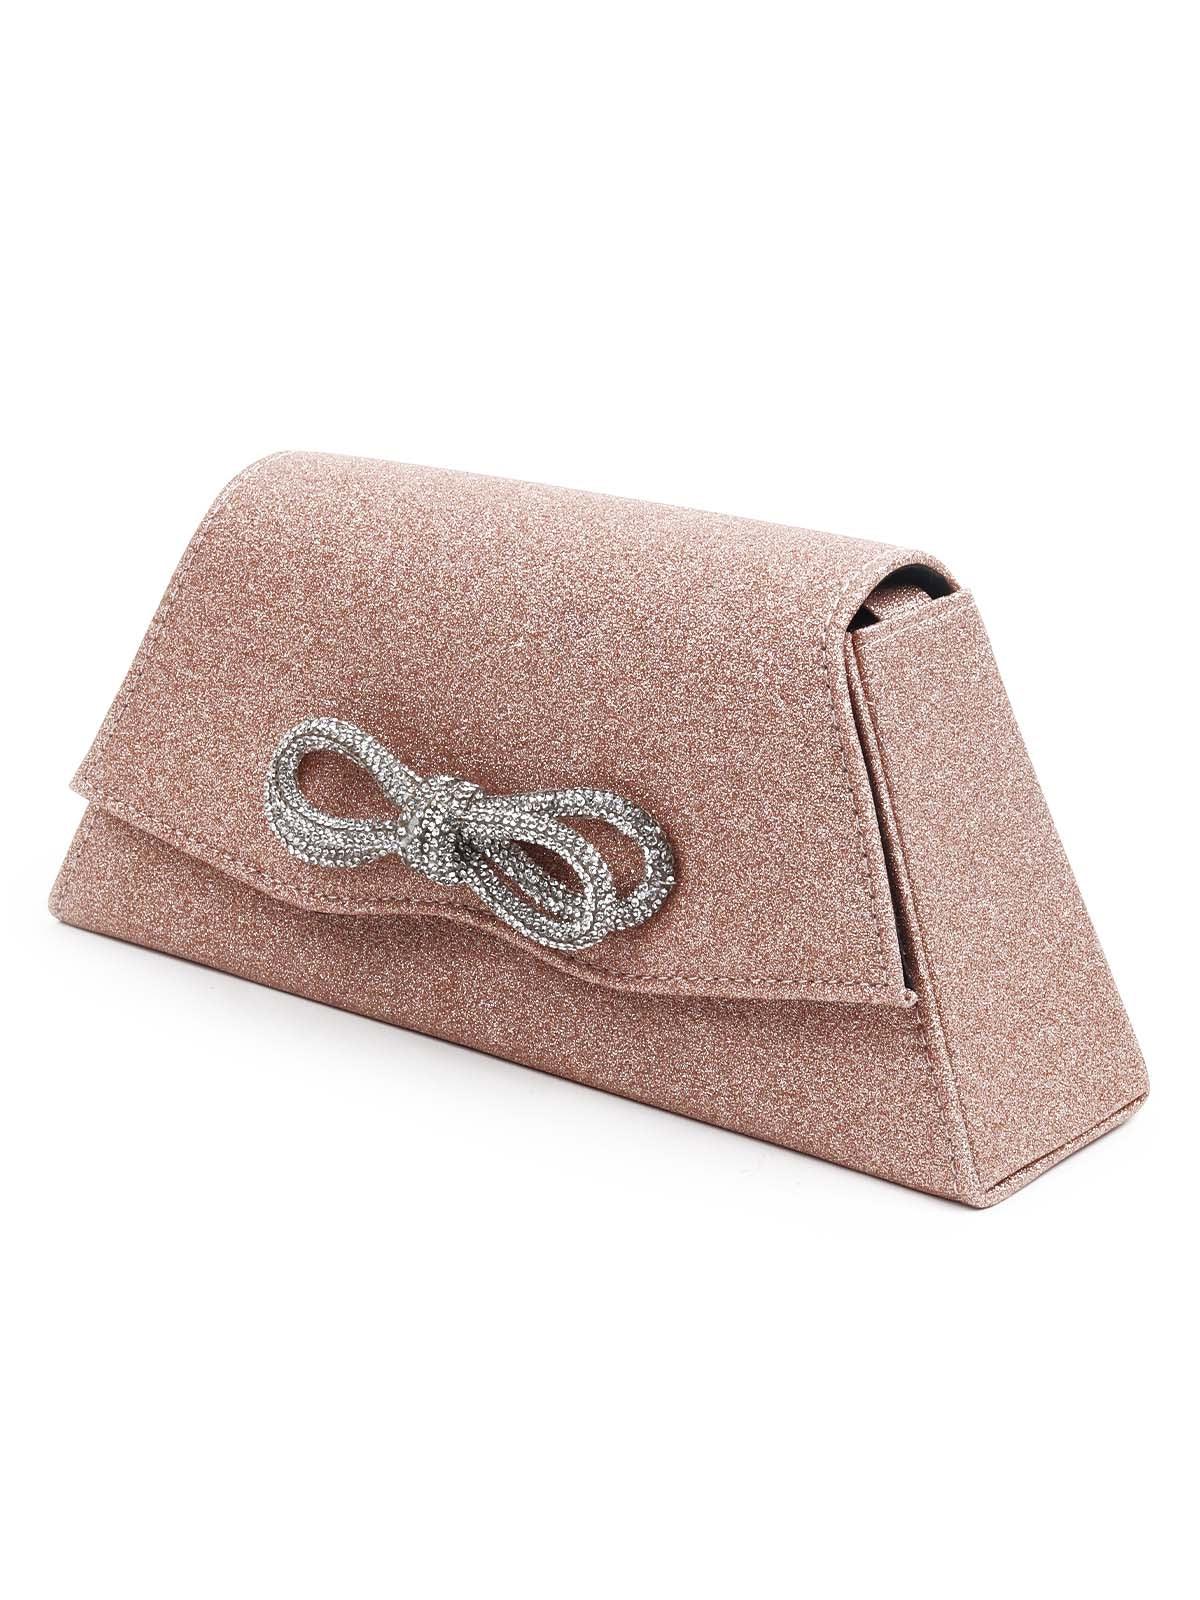 Luxury Design Women's Small Square Side Bags 2023 New High Fashion Solid Color  Purse Small Rose Red Diamond Chain Crossbody Bags